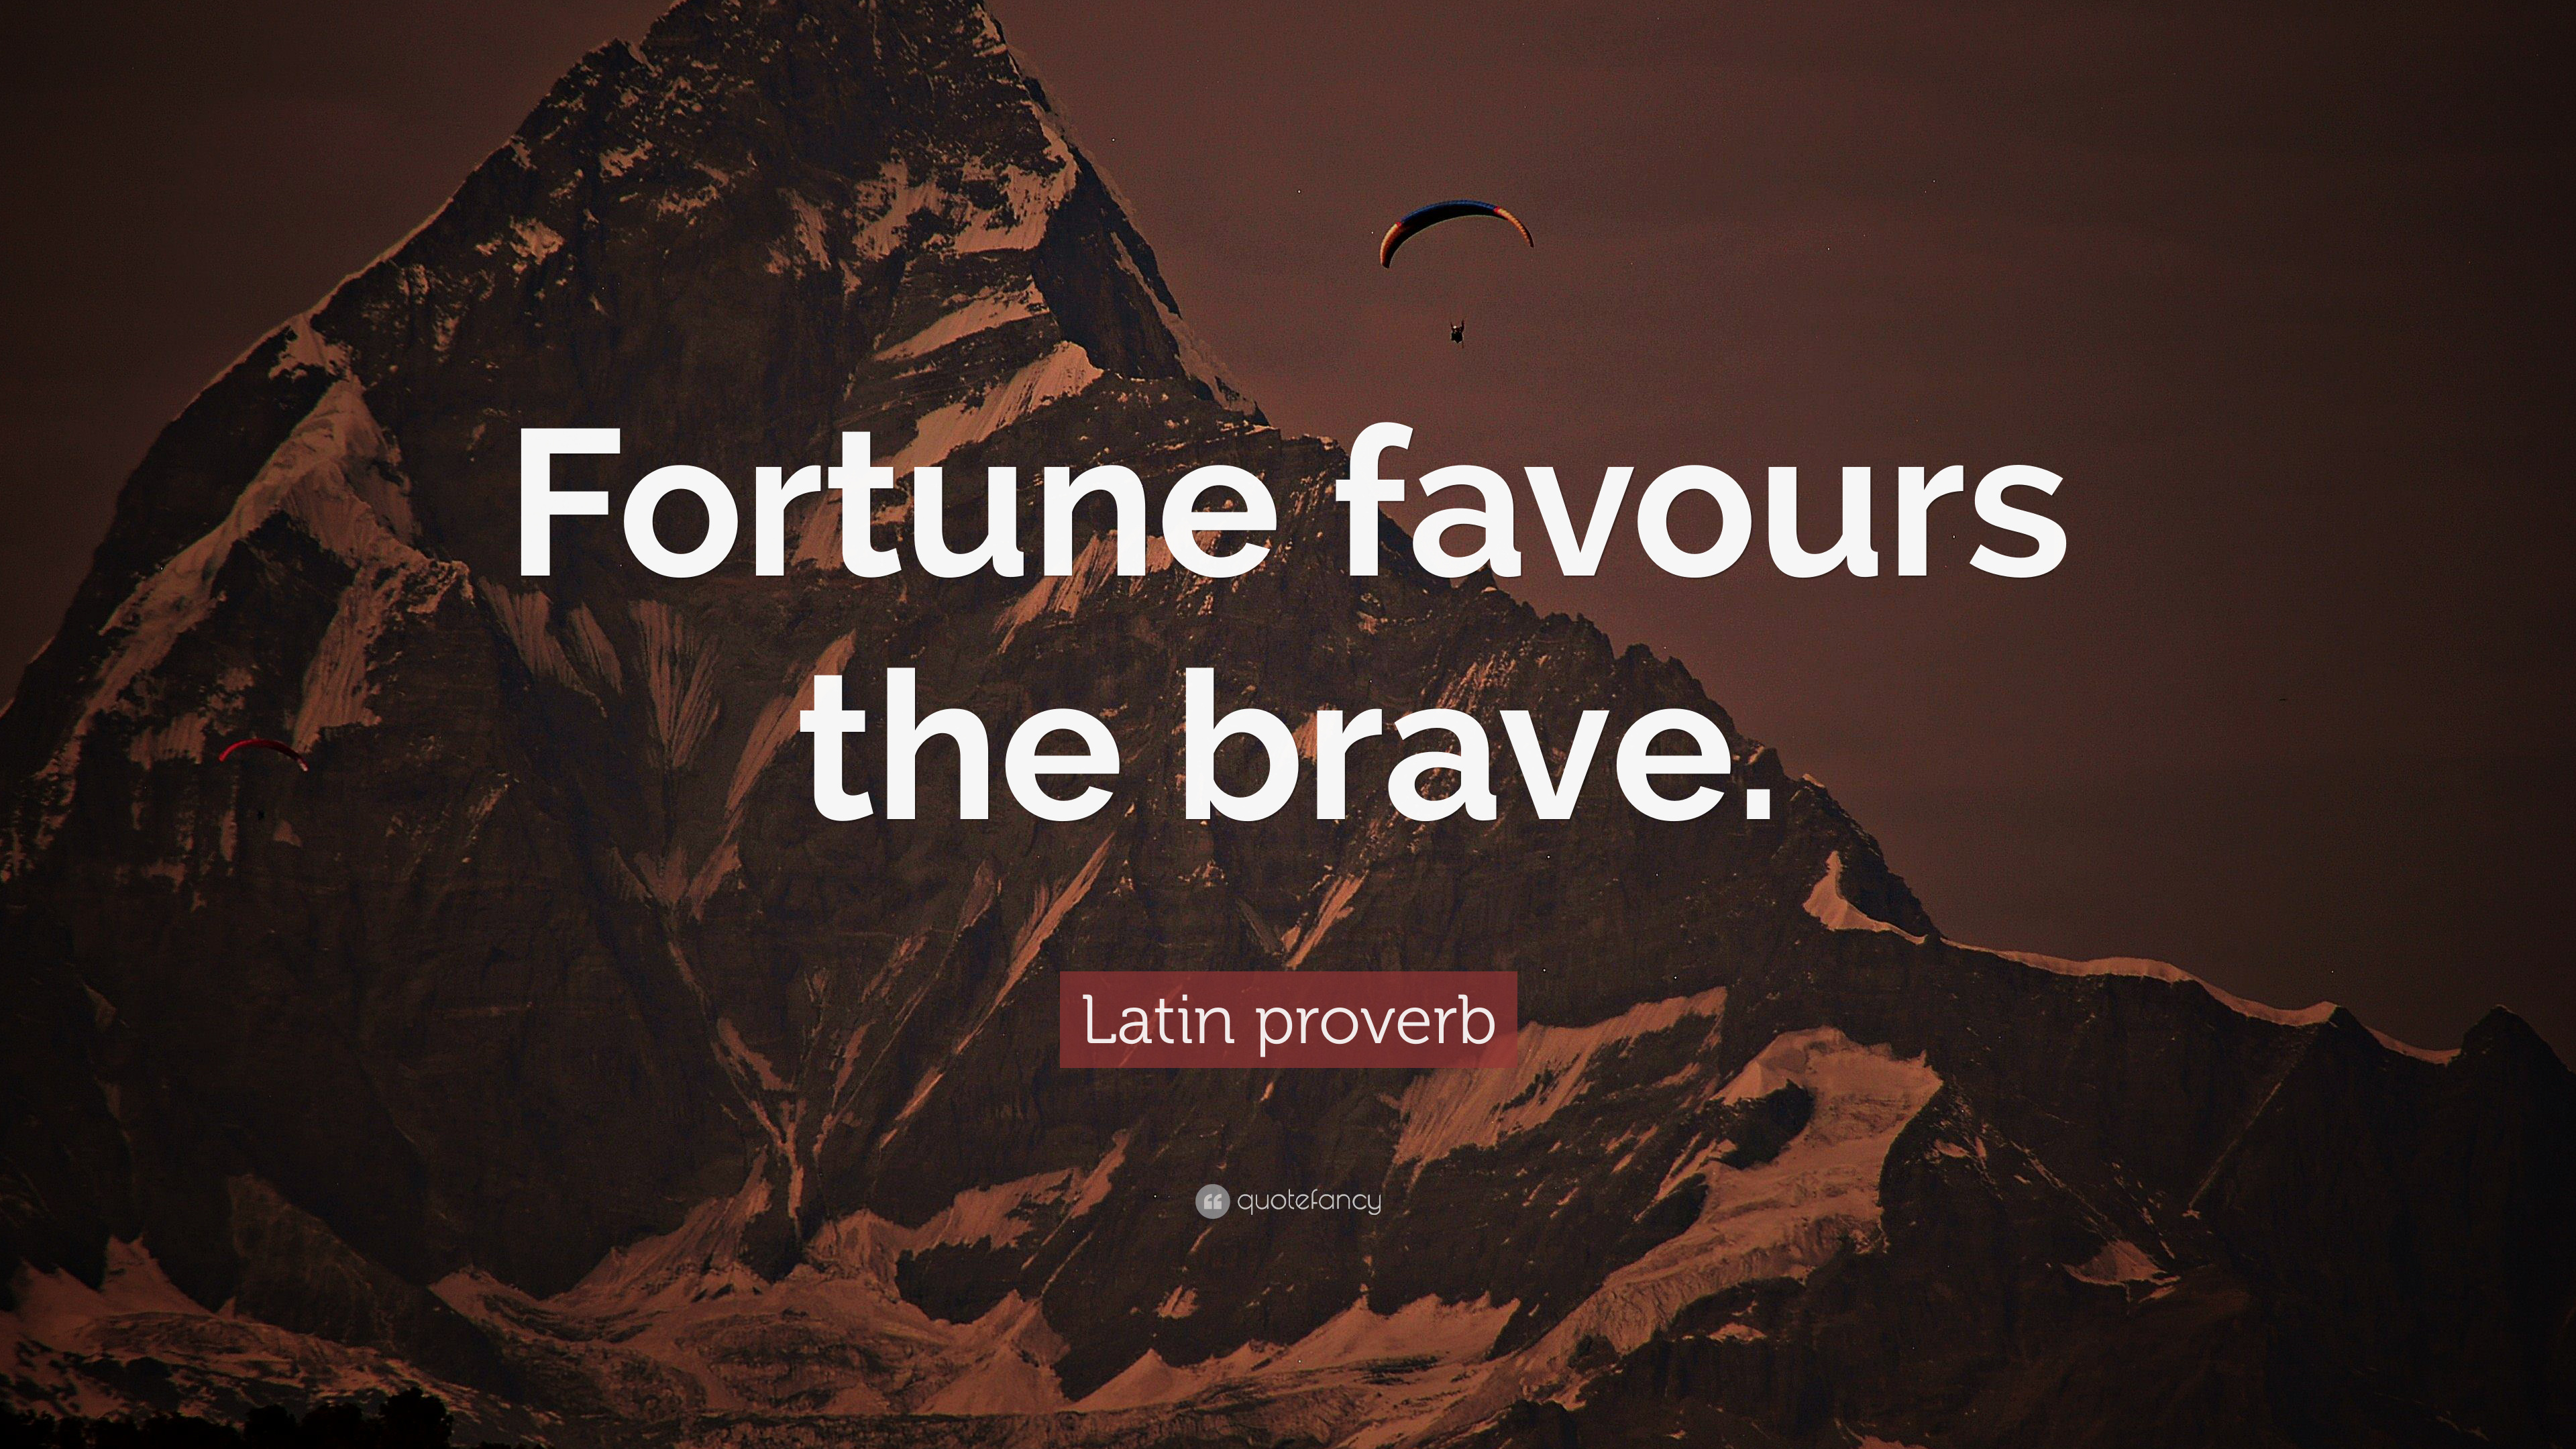 Latin proverb Quote: “Fortune favours the brave.”